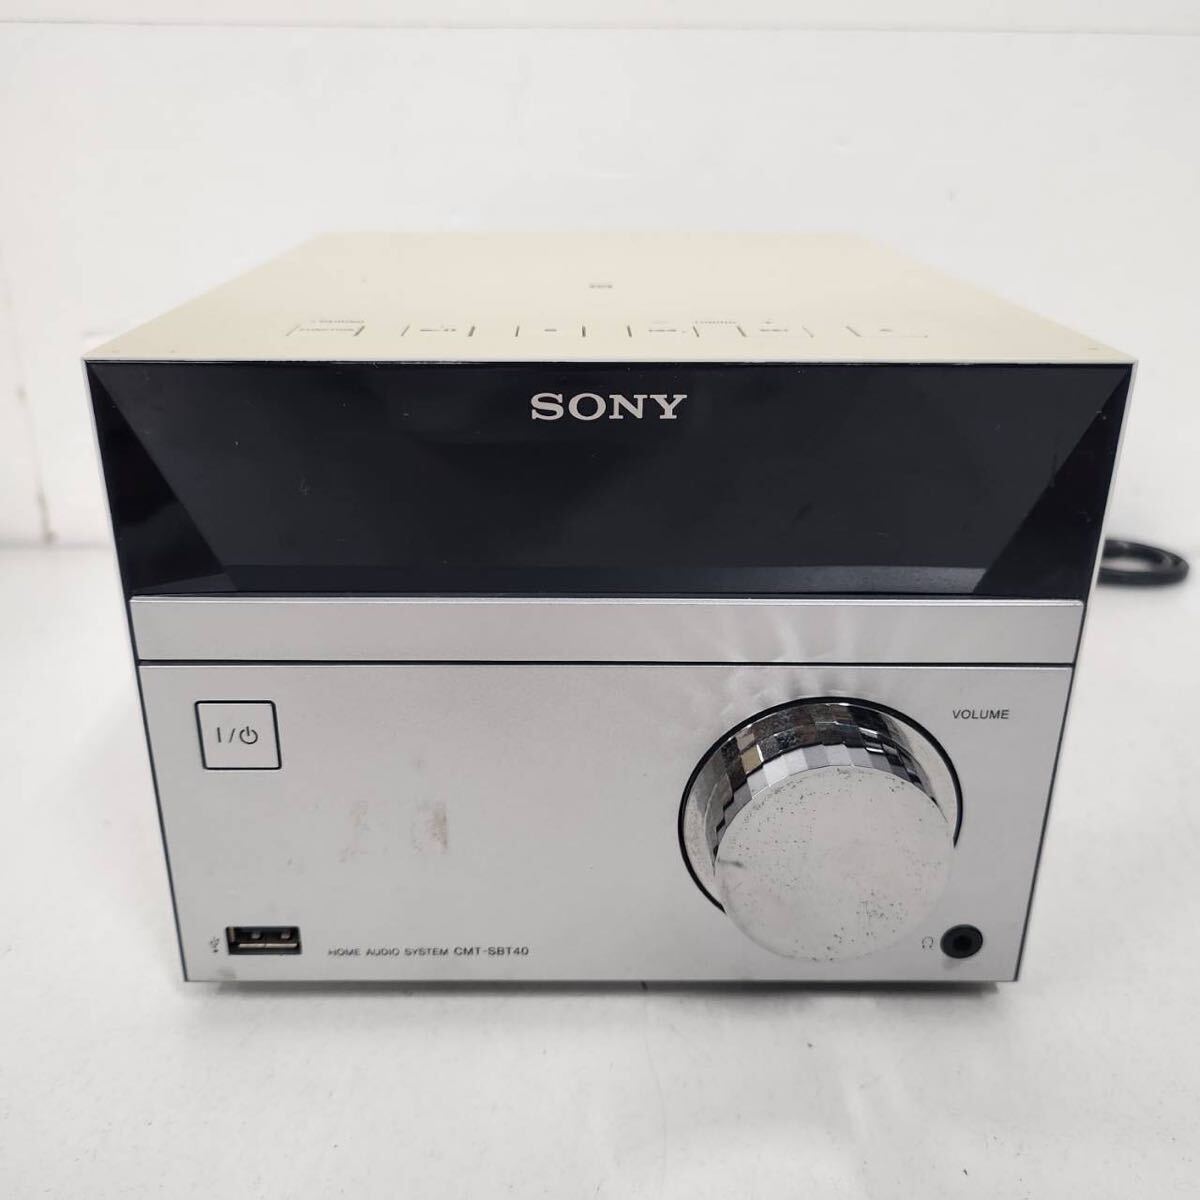 SONY Sony multi Connect system player HCD-SBT40 mini component CD player 2015 year made remote control none [NK5840]